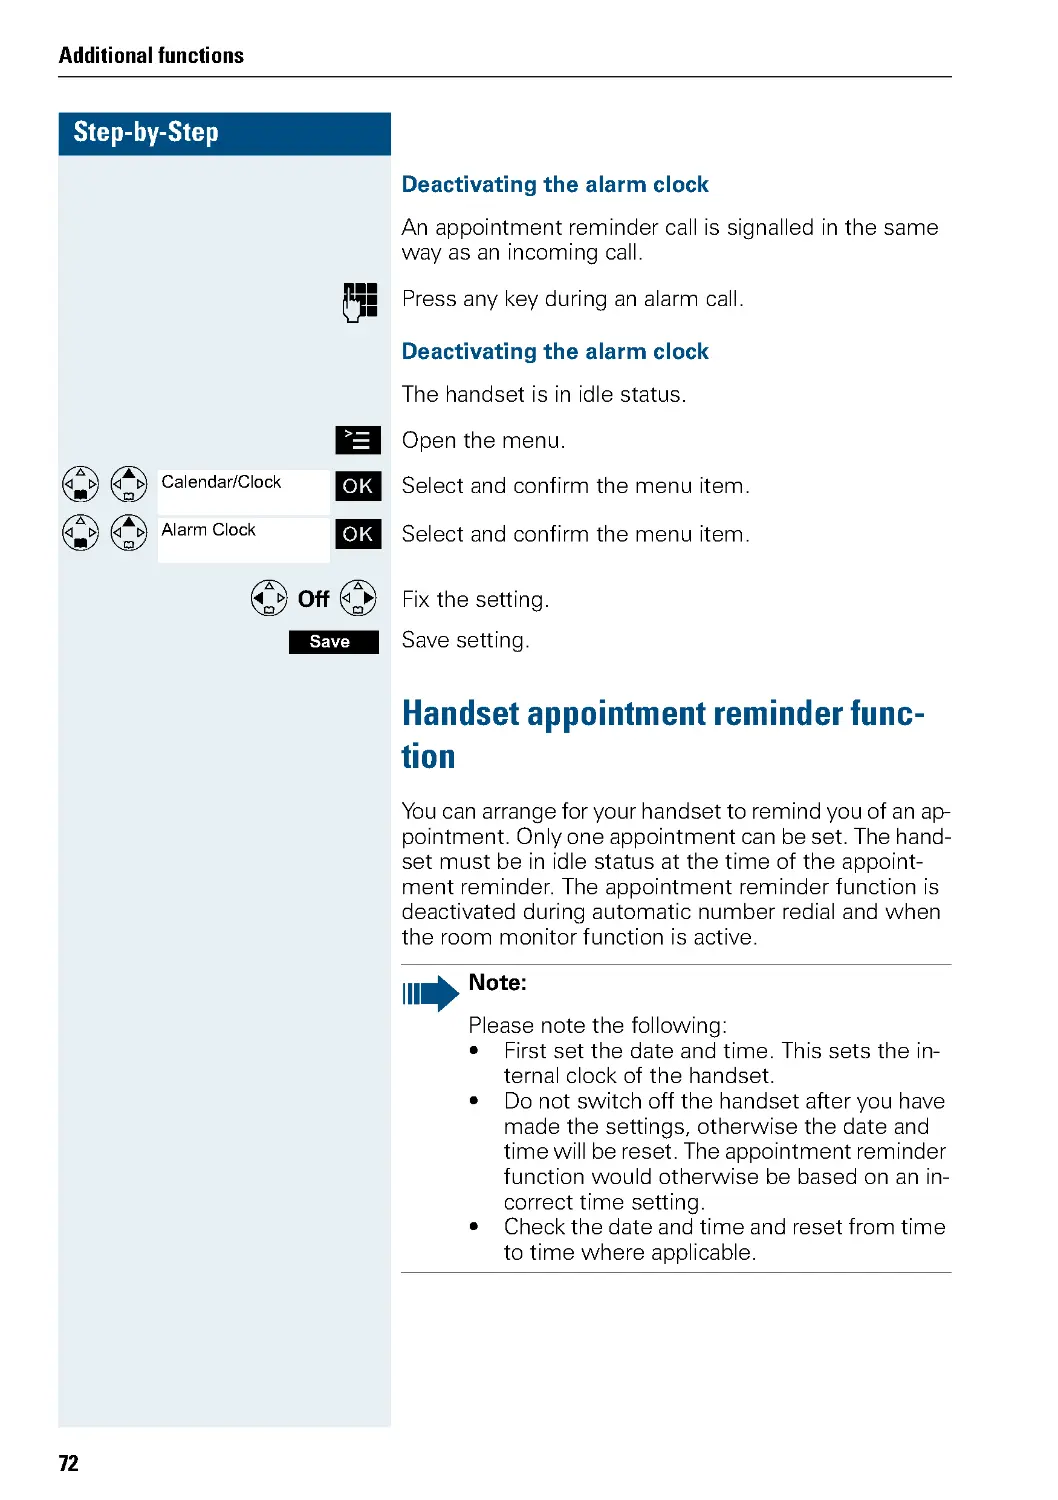 Handset appointment reminder function